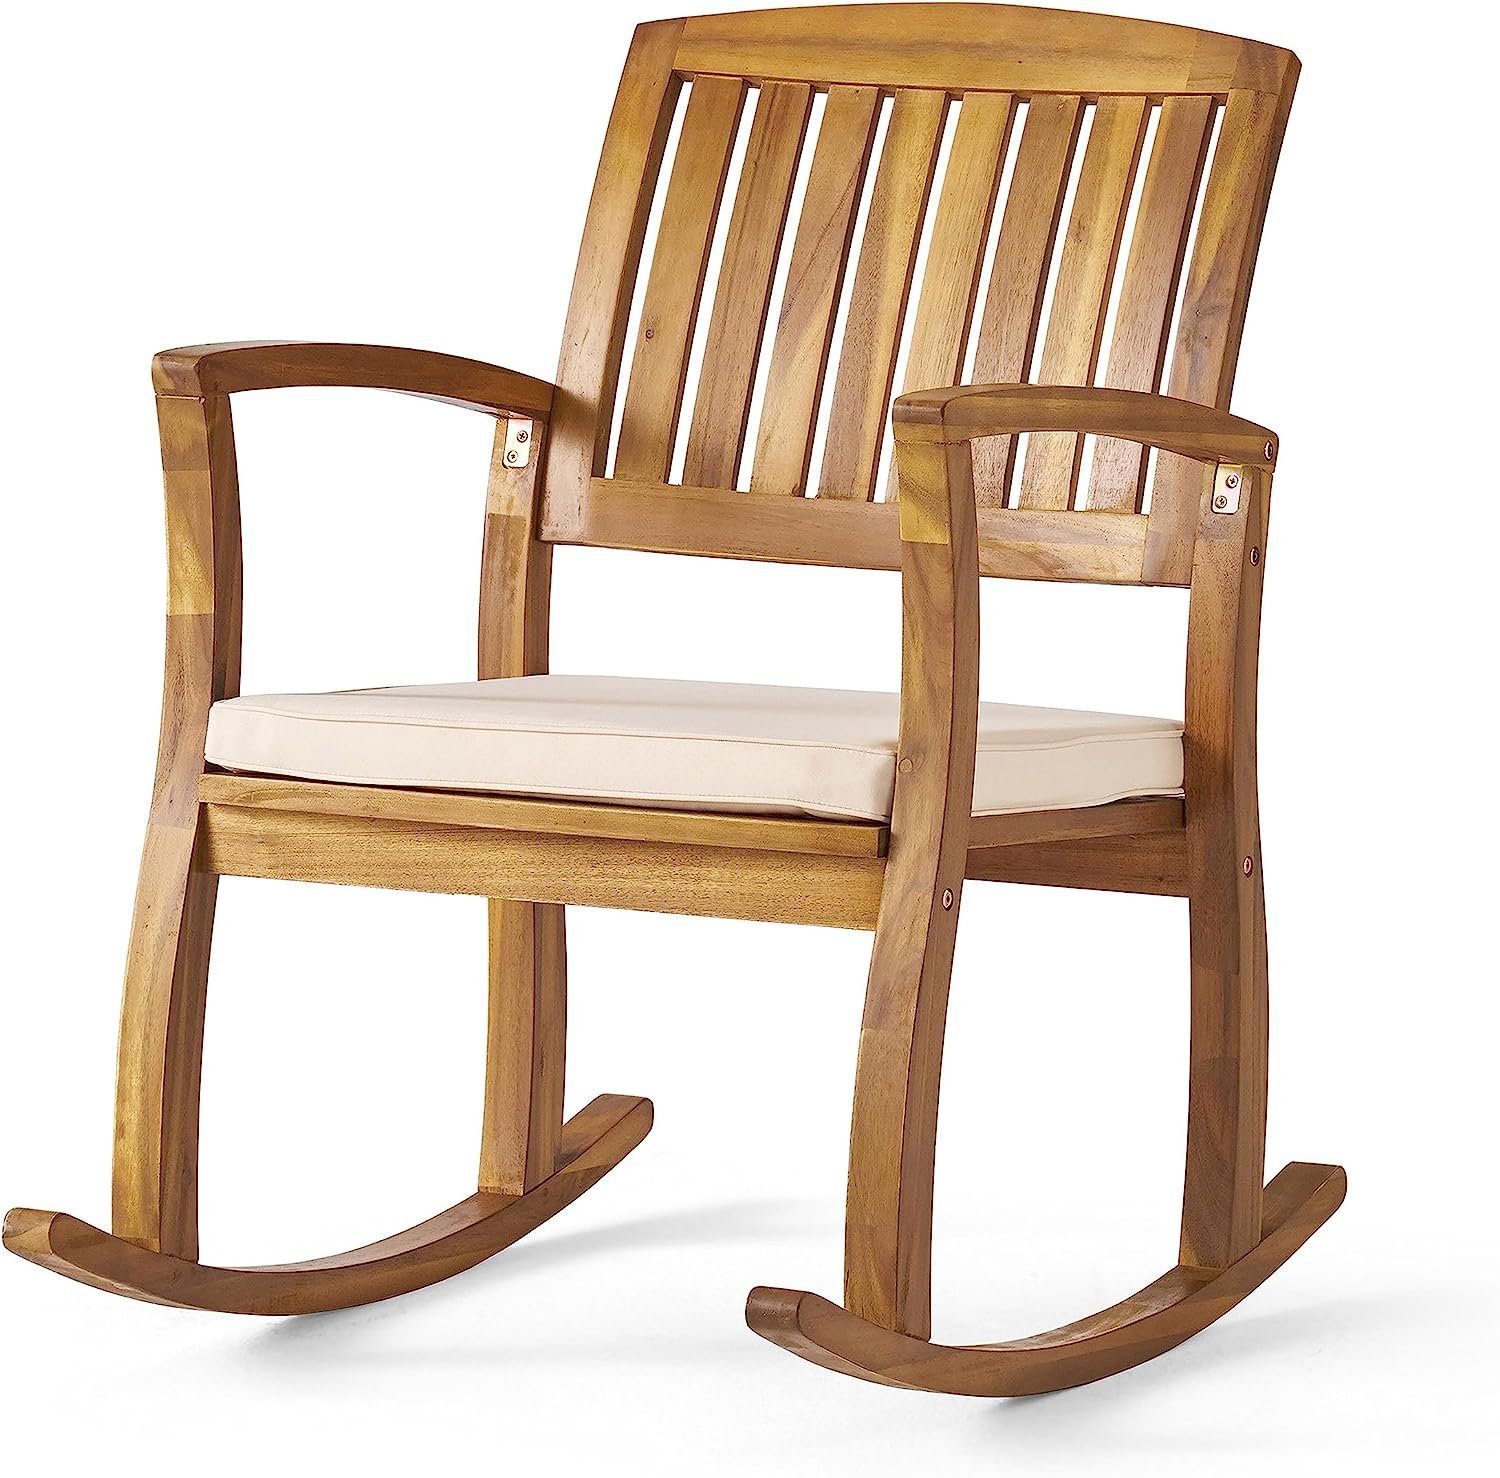 Christopher Knight Wooden Chair 